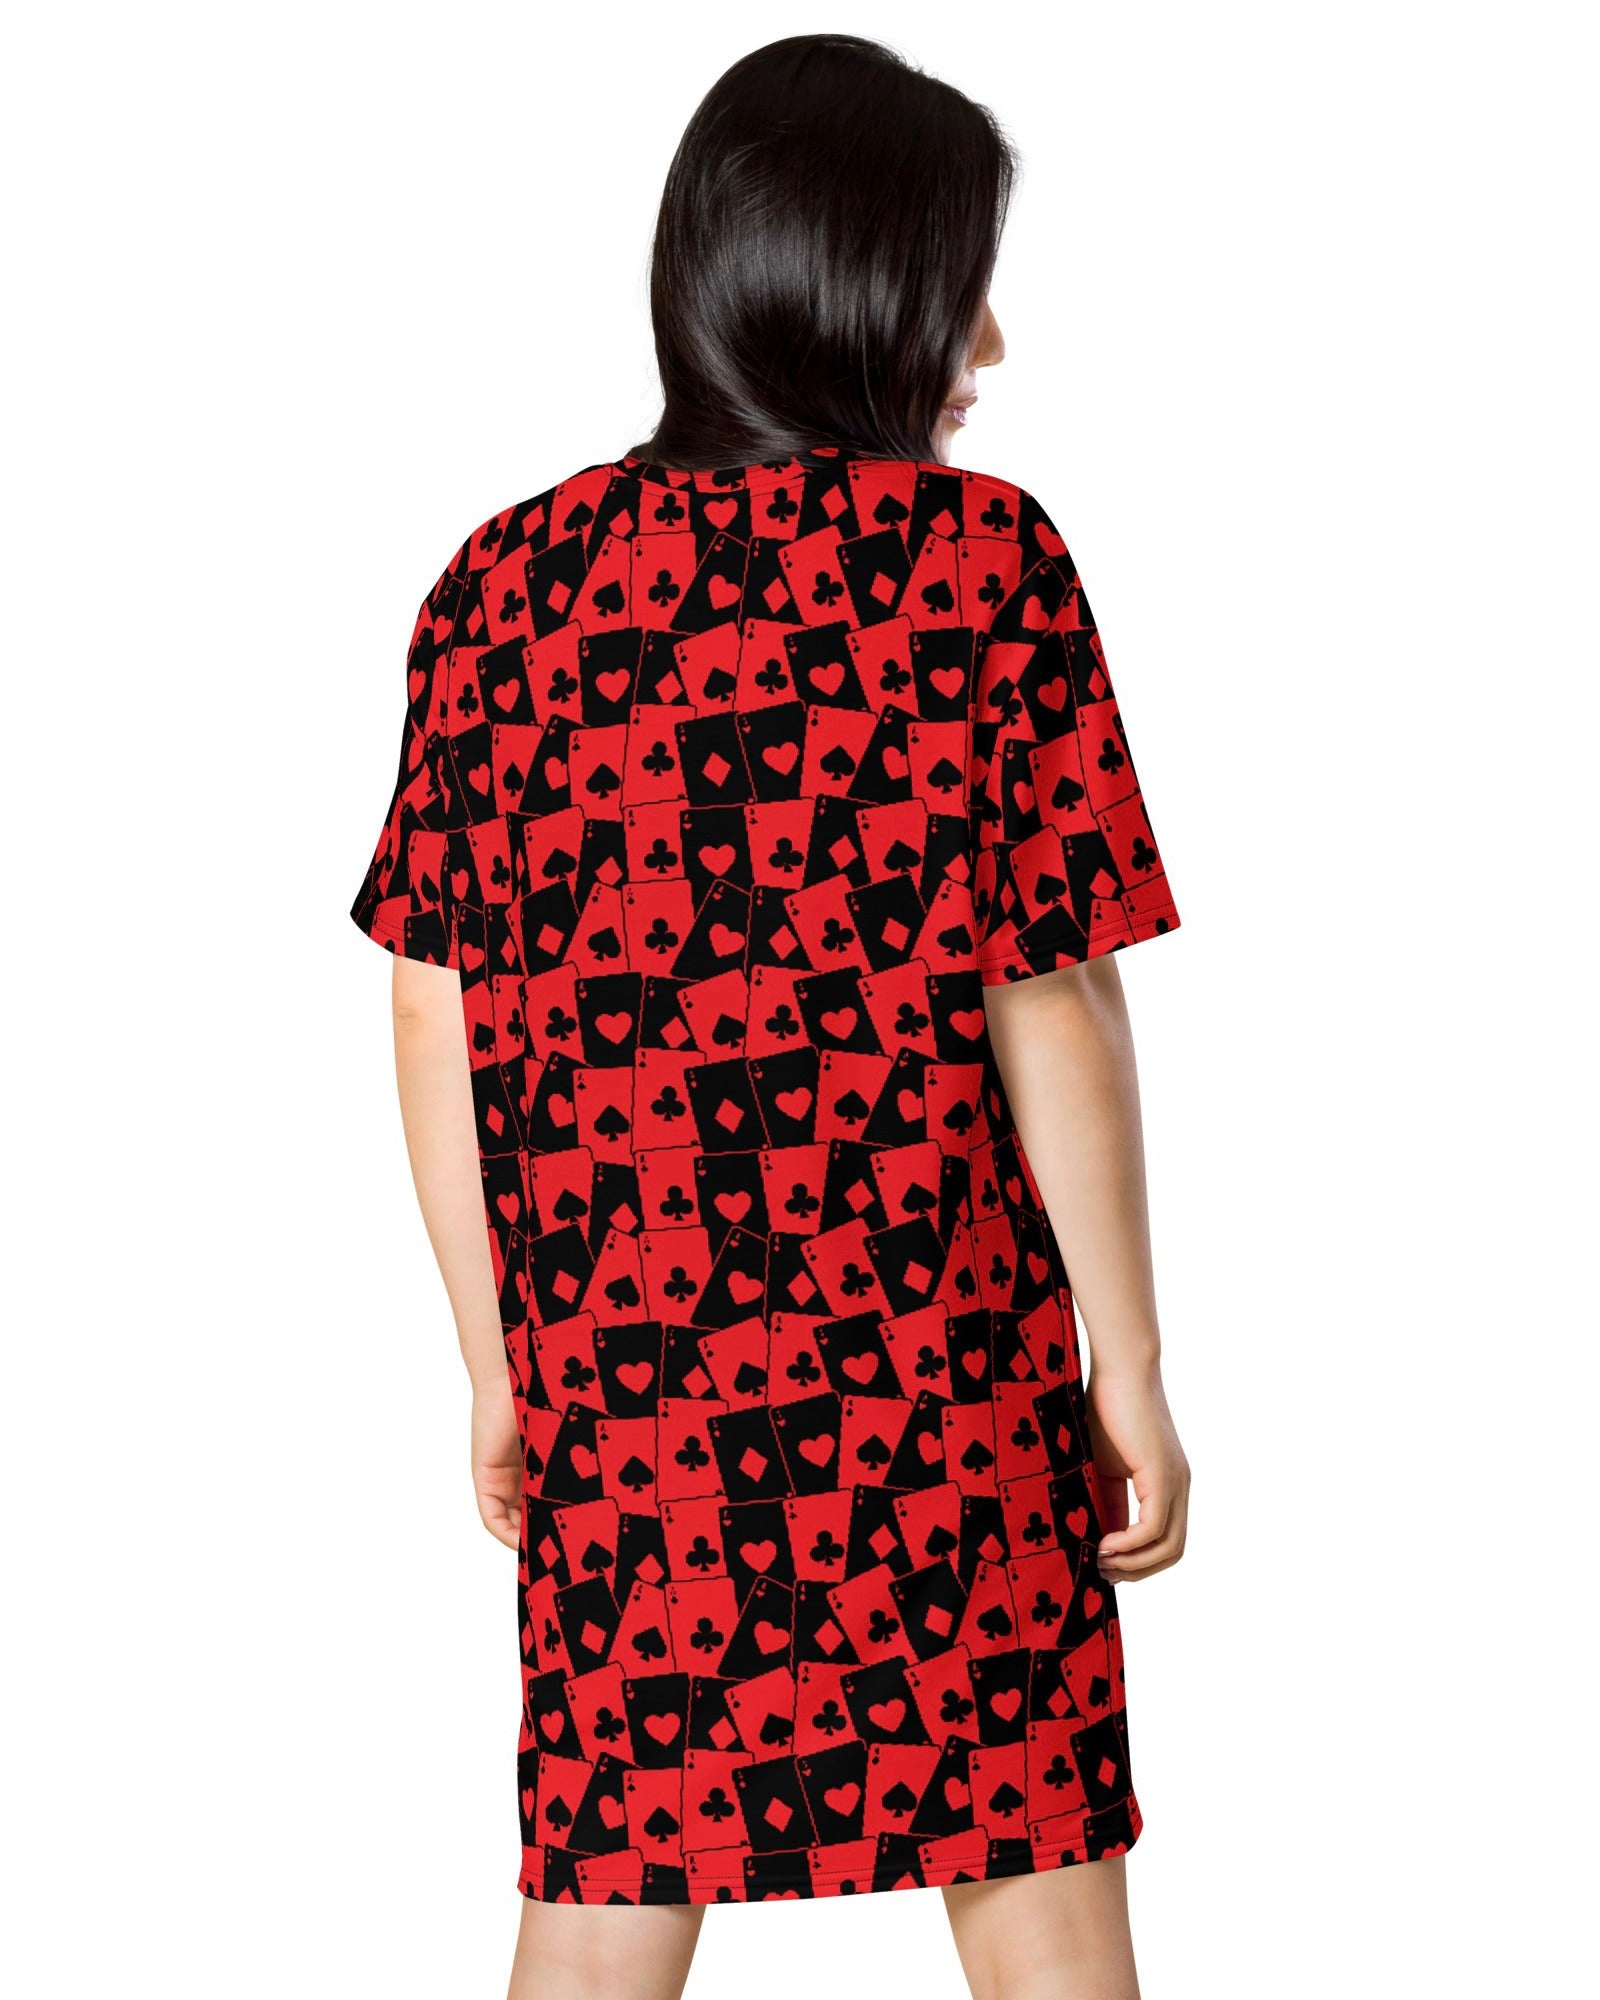 Ace Of Hearts T-shirt dress, T-Shirt Dress, - One Stop Rave